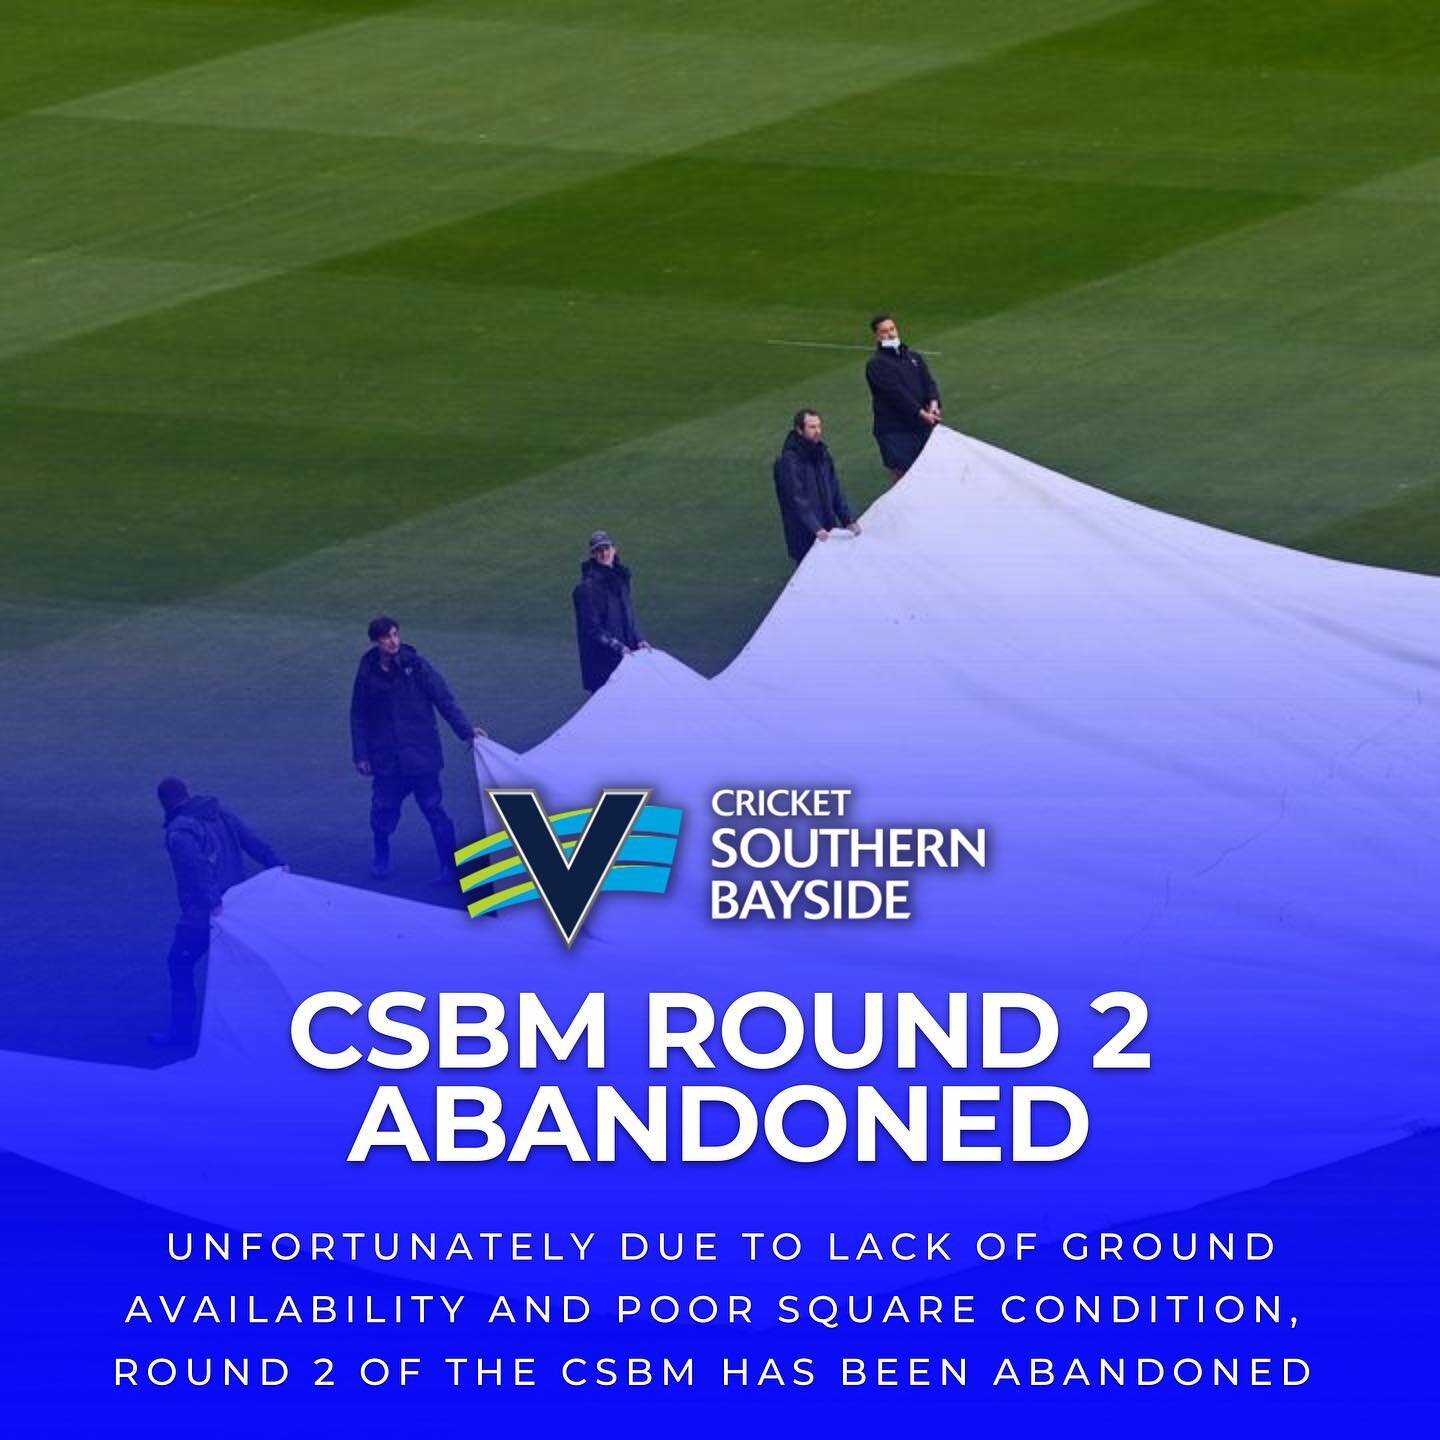 Unfortunately, due to a variety of factors relating to ground condition and availability, Round 2 of the CSBM competition has been abandoned.

Teams will share the points for the match, as the reserve day in January has already been allocated to repl